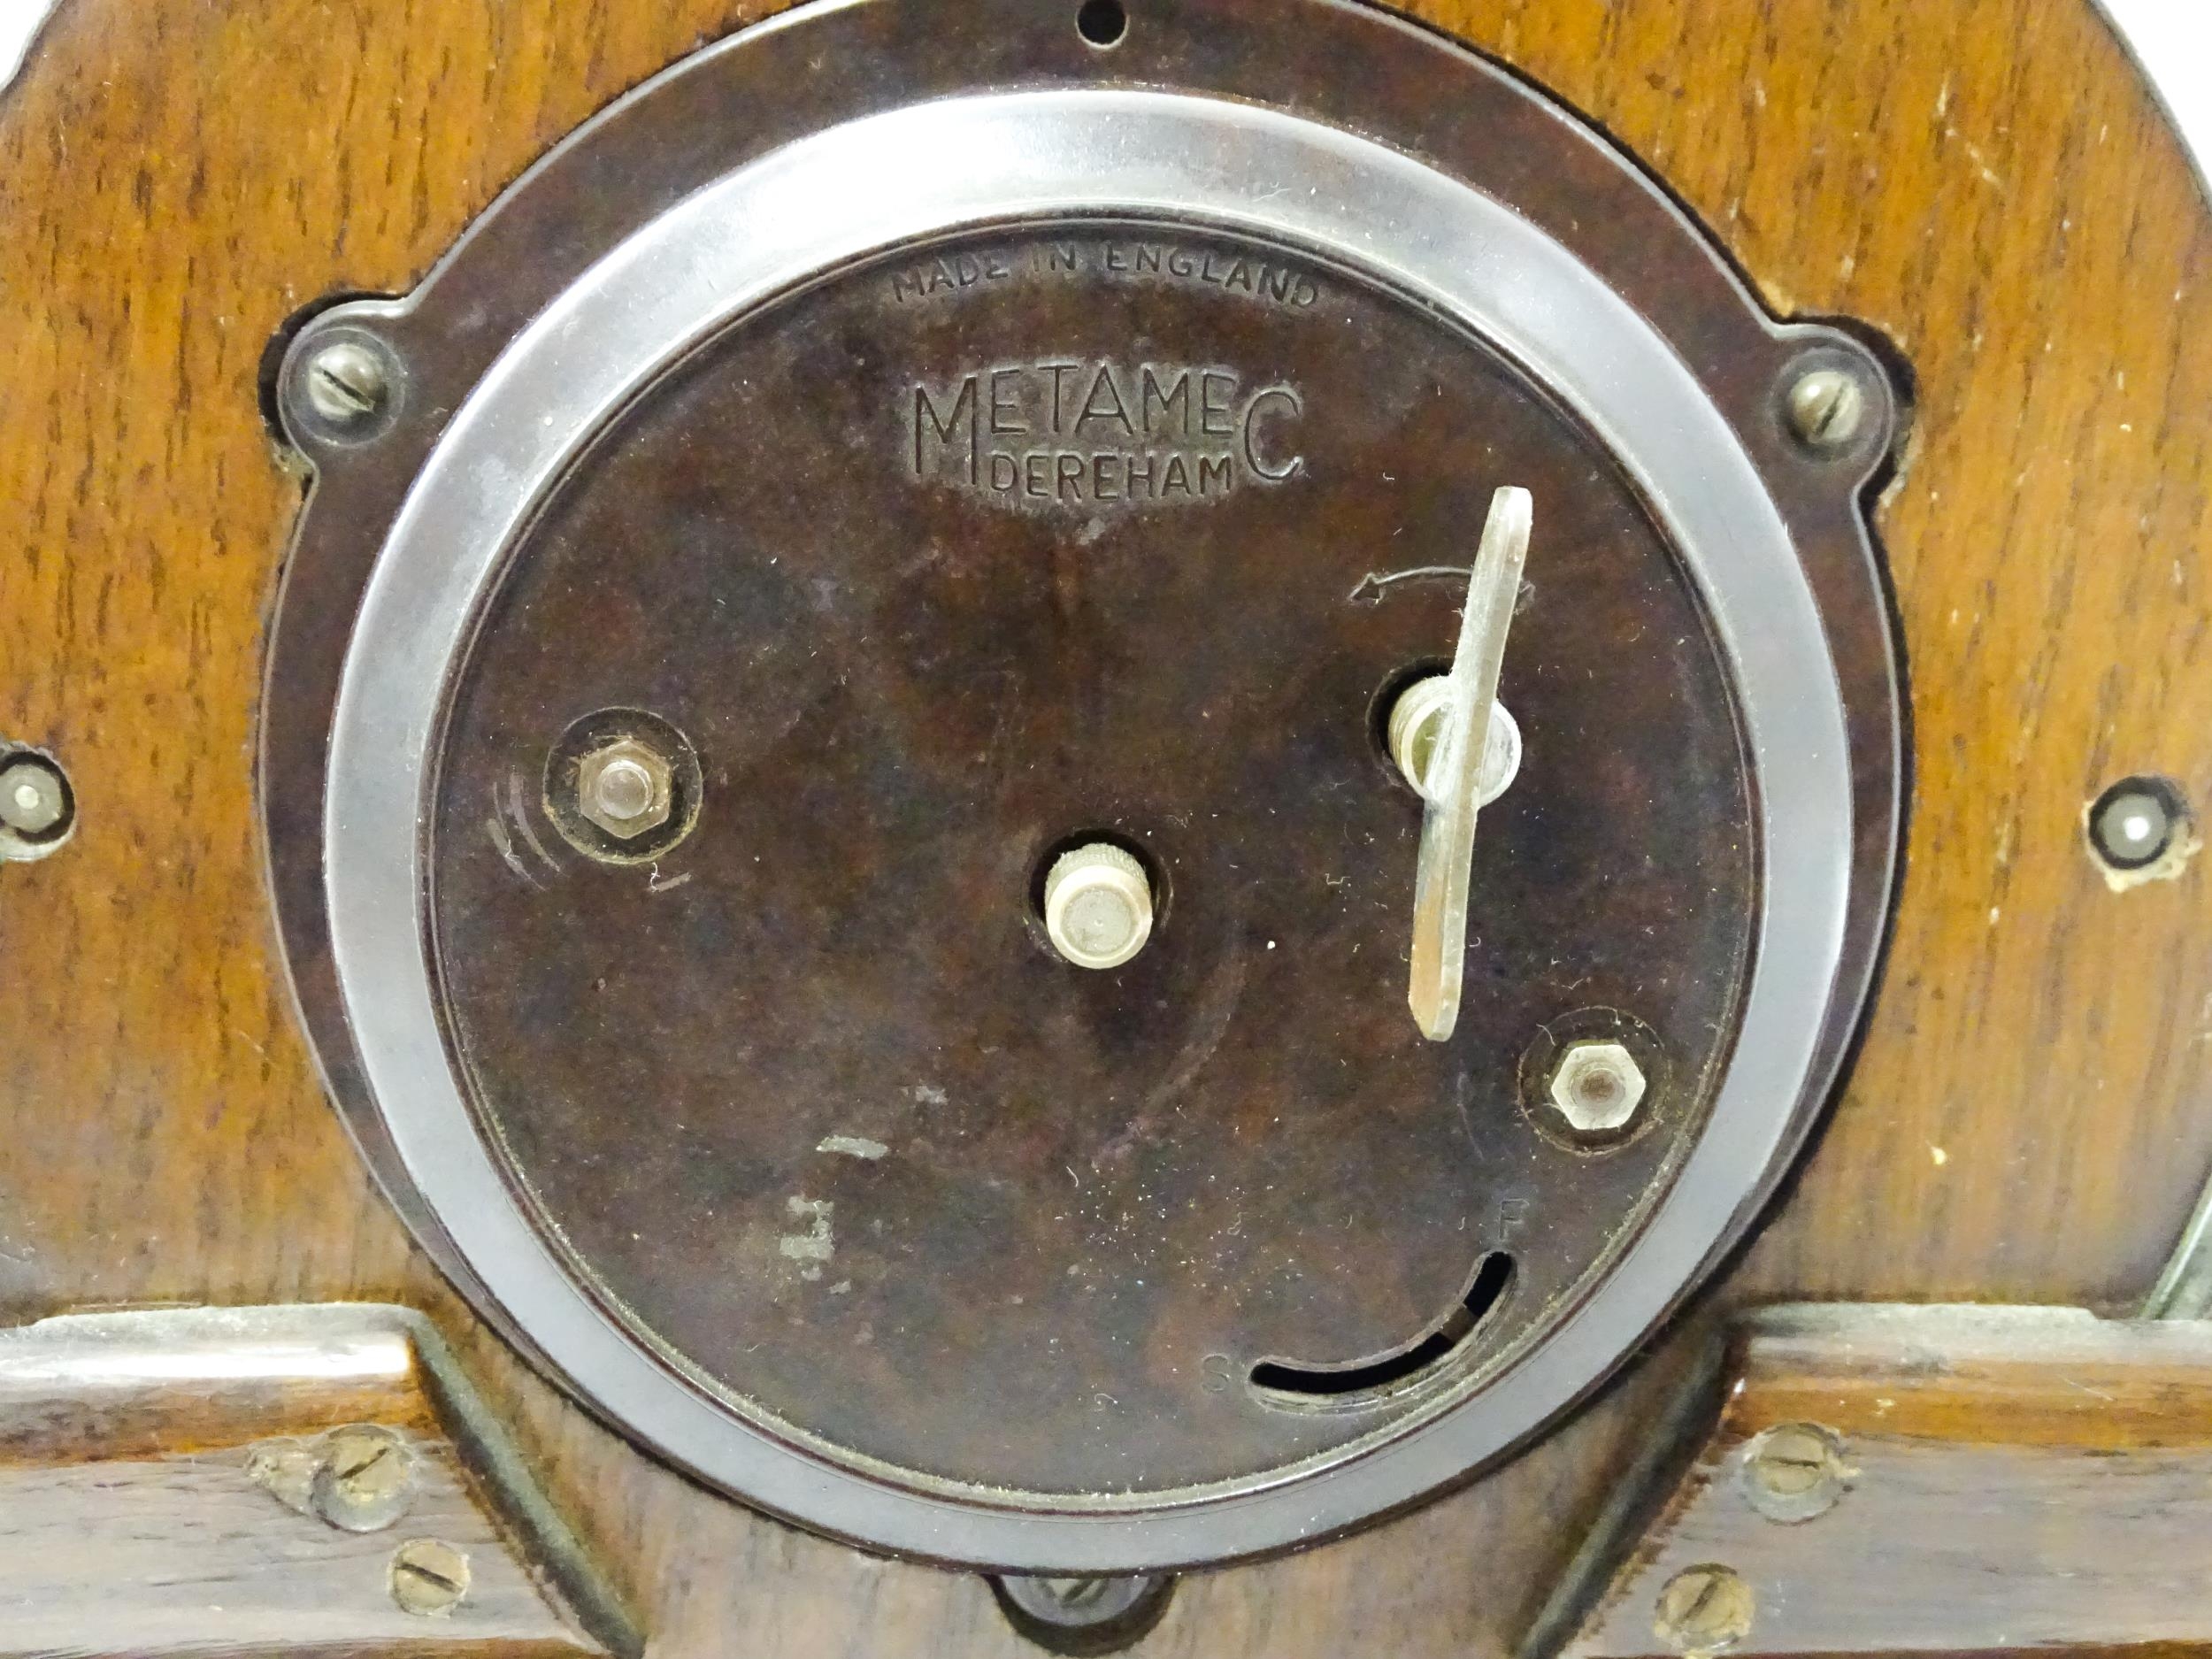 An Art Deco Metamec Dereham mantle clock. Approx. 8" high Please Note - we do not make reference - Image 7 of 7